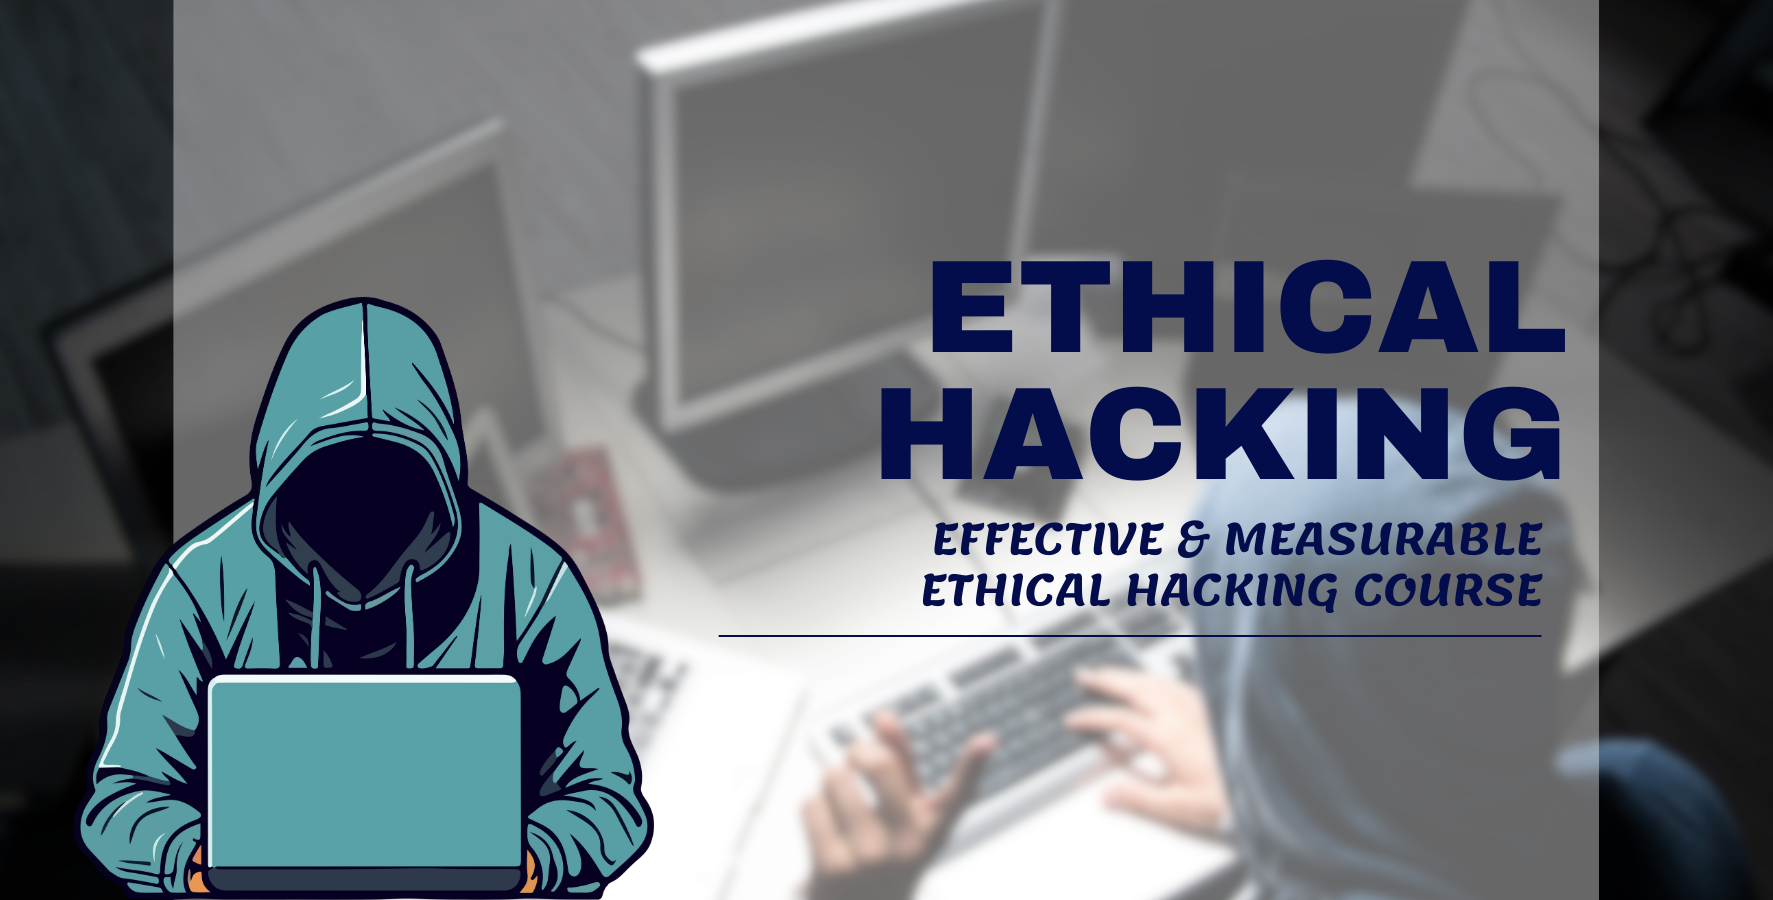 Ethical hacking course